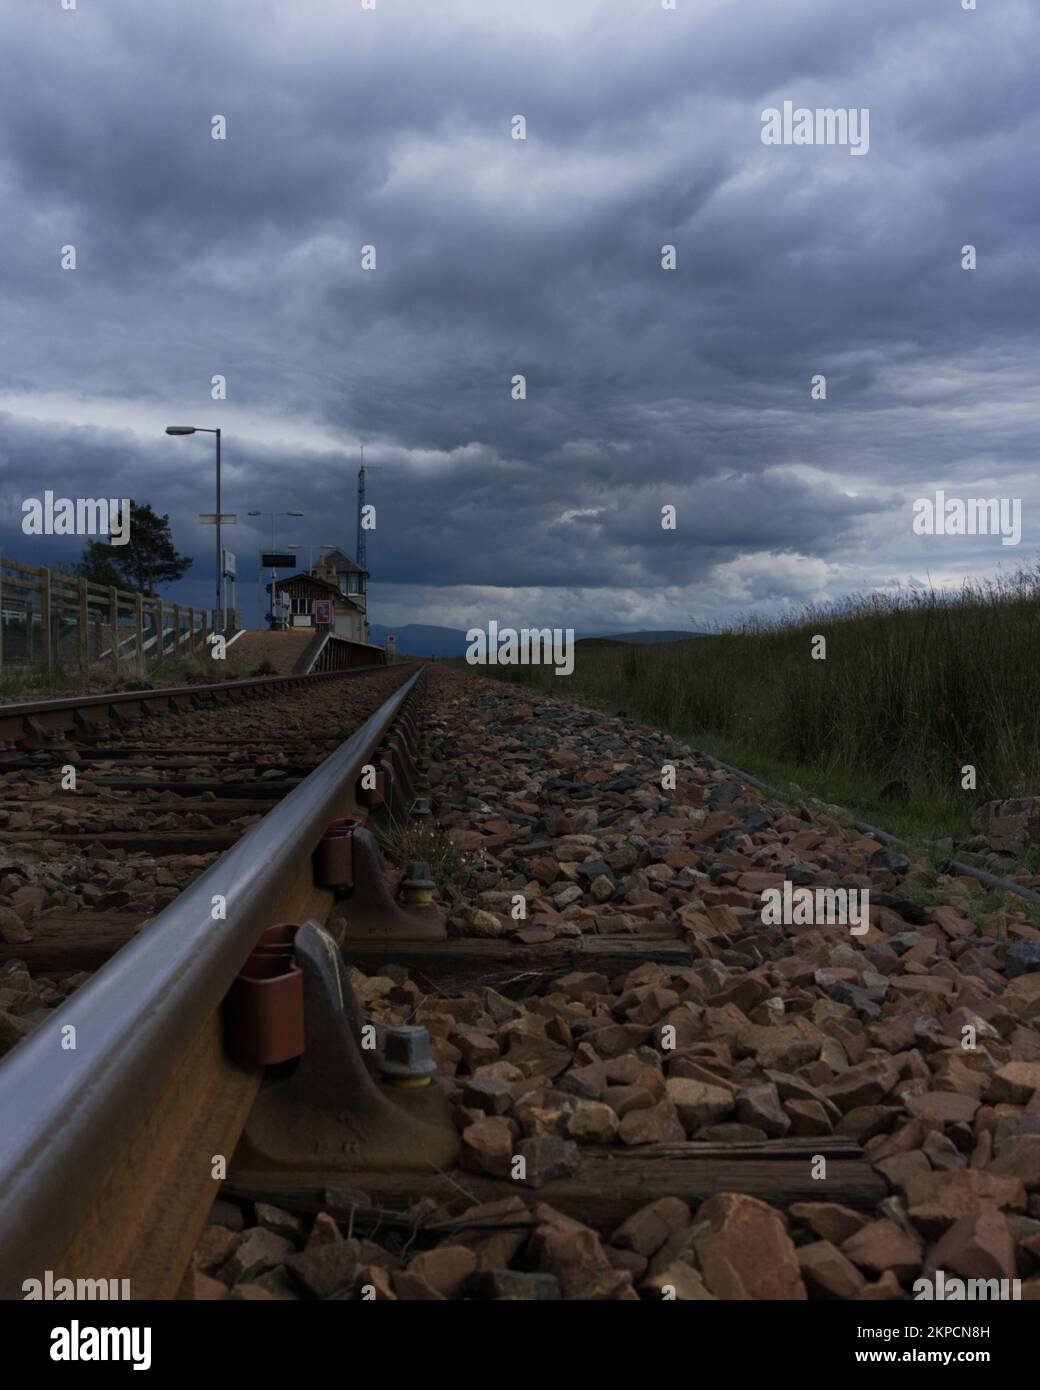 A vertical shot of an empty railroad against the cloudy sky background Stock Photo